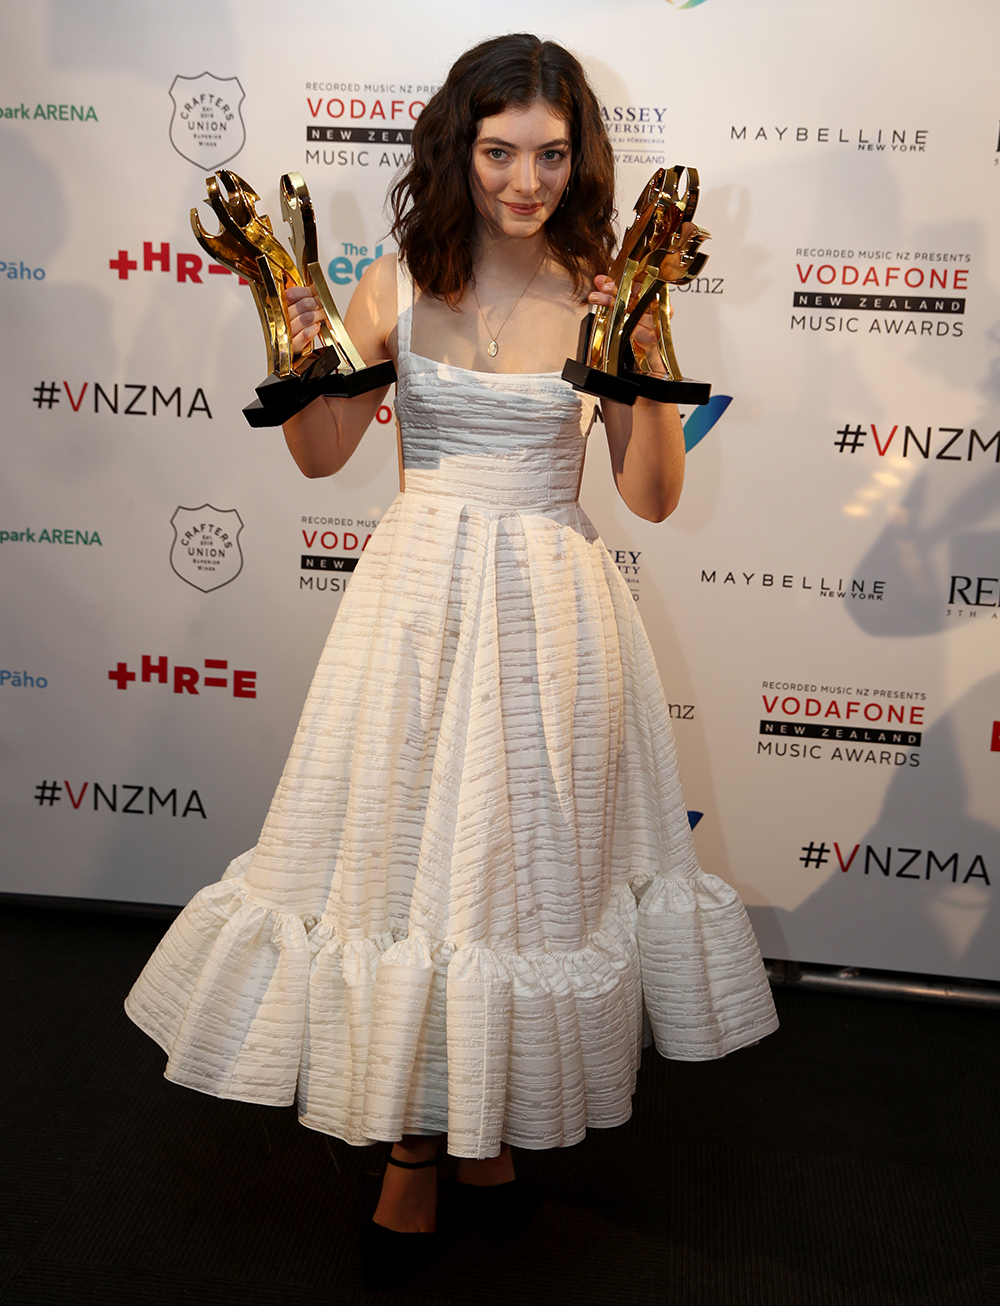 Lorde wears a white dress with stripe detailing and a peplum hem at the VNZMAs.